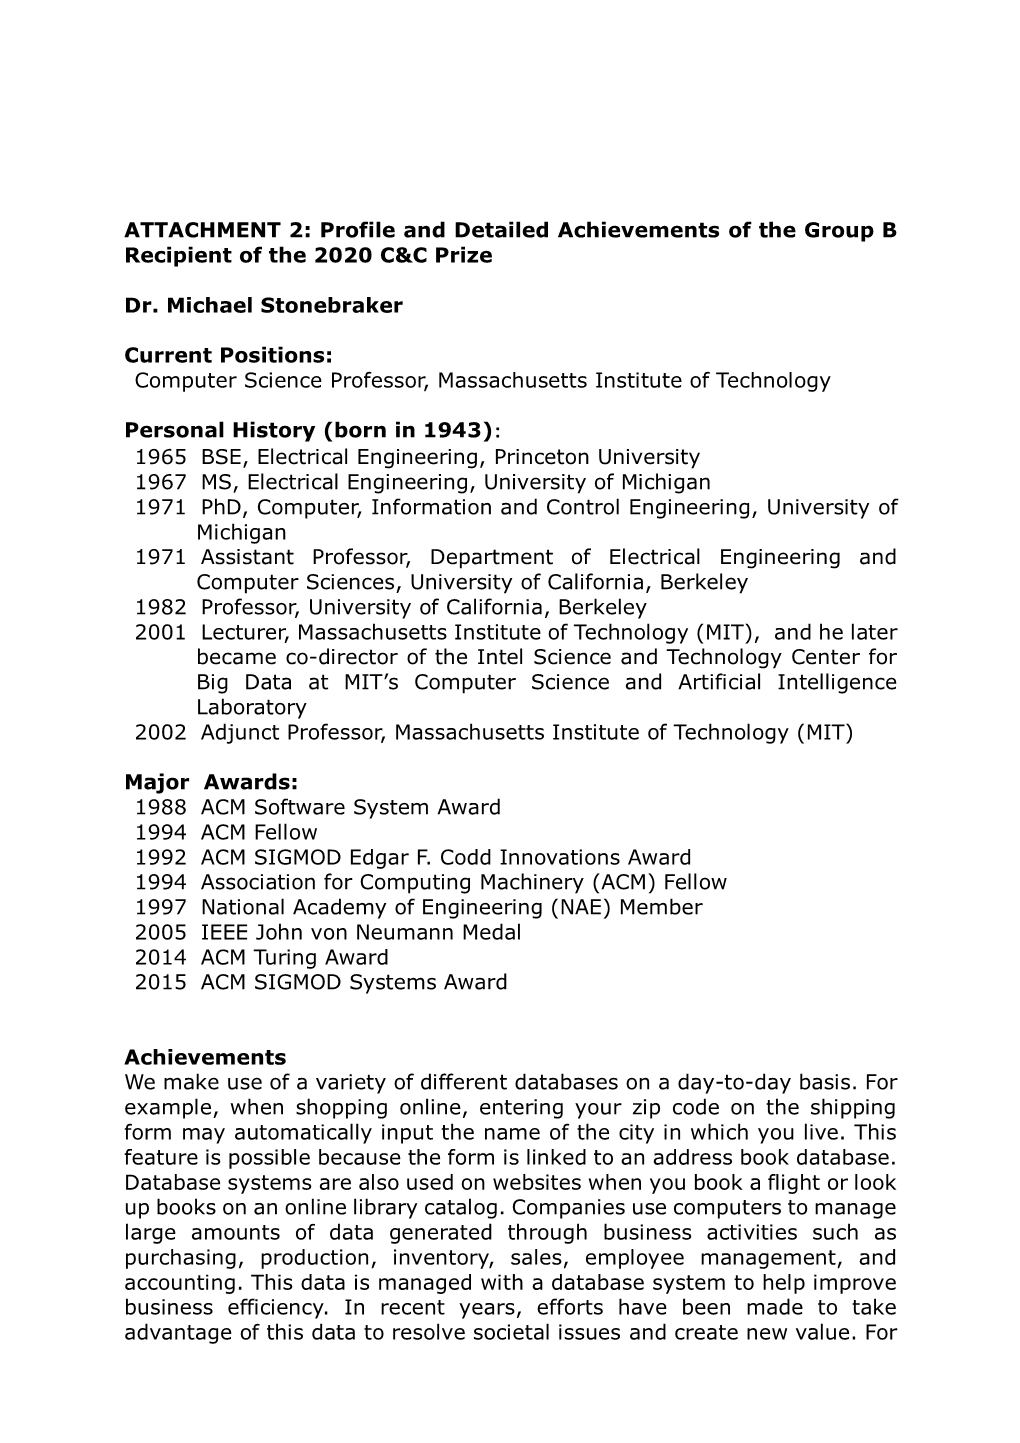 ATTACHMENT 2: Profile and Detailed Achievements of the Group B Recipient of the 2020 C&C Prize Dr. Michael Stonebraker Curre